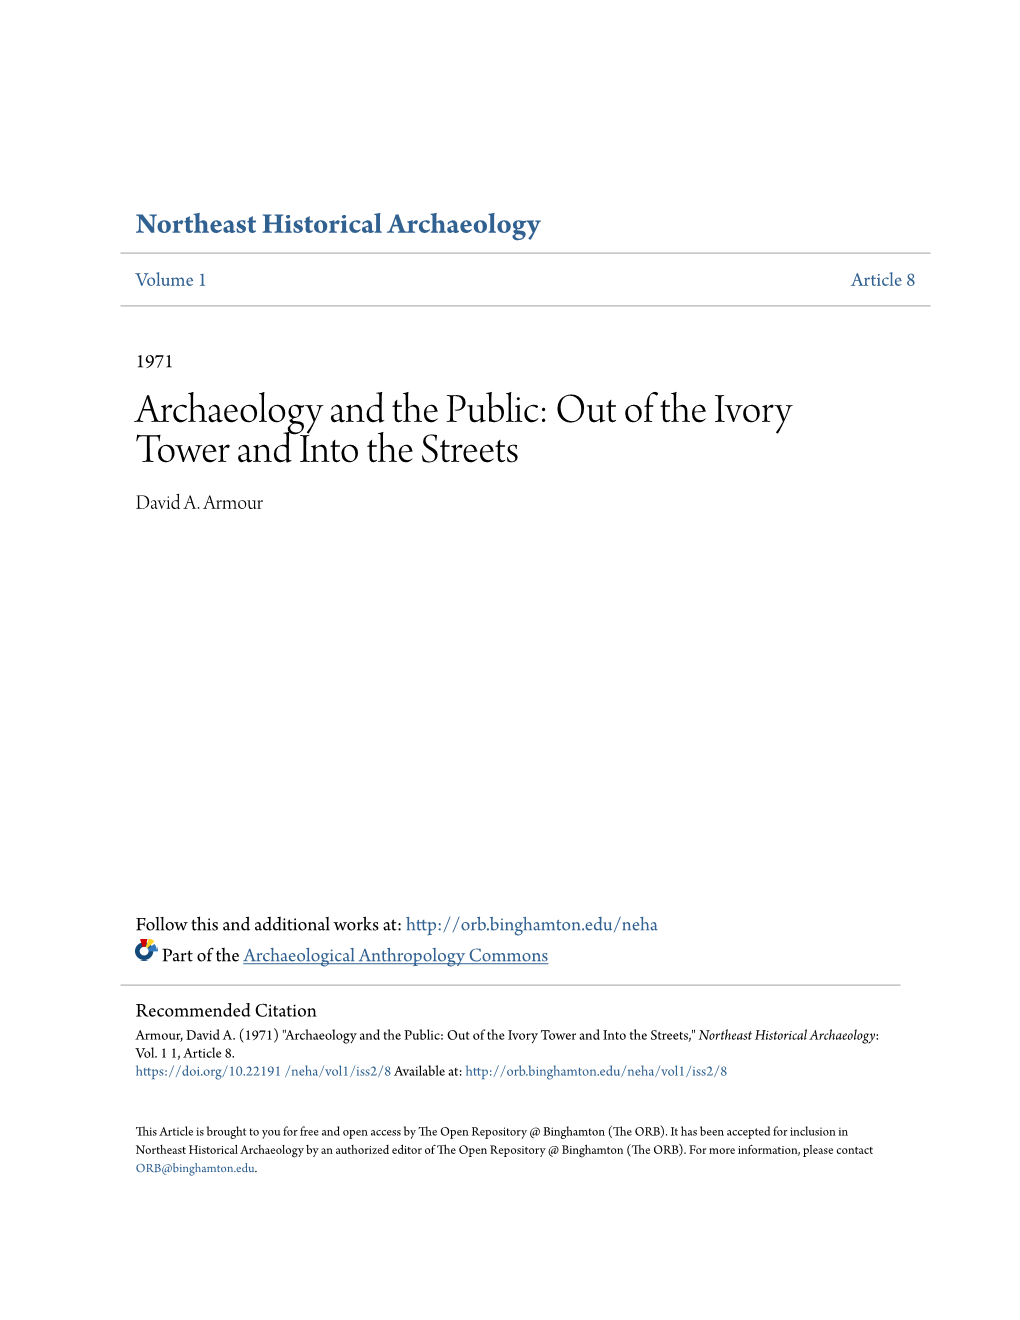 Archaeology and the Public: out of the Ivory Tower and Into the Streets David A